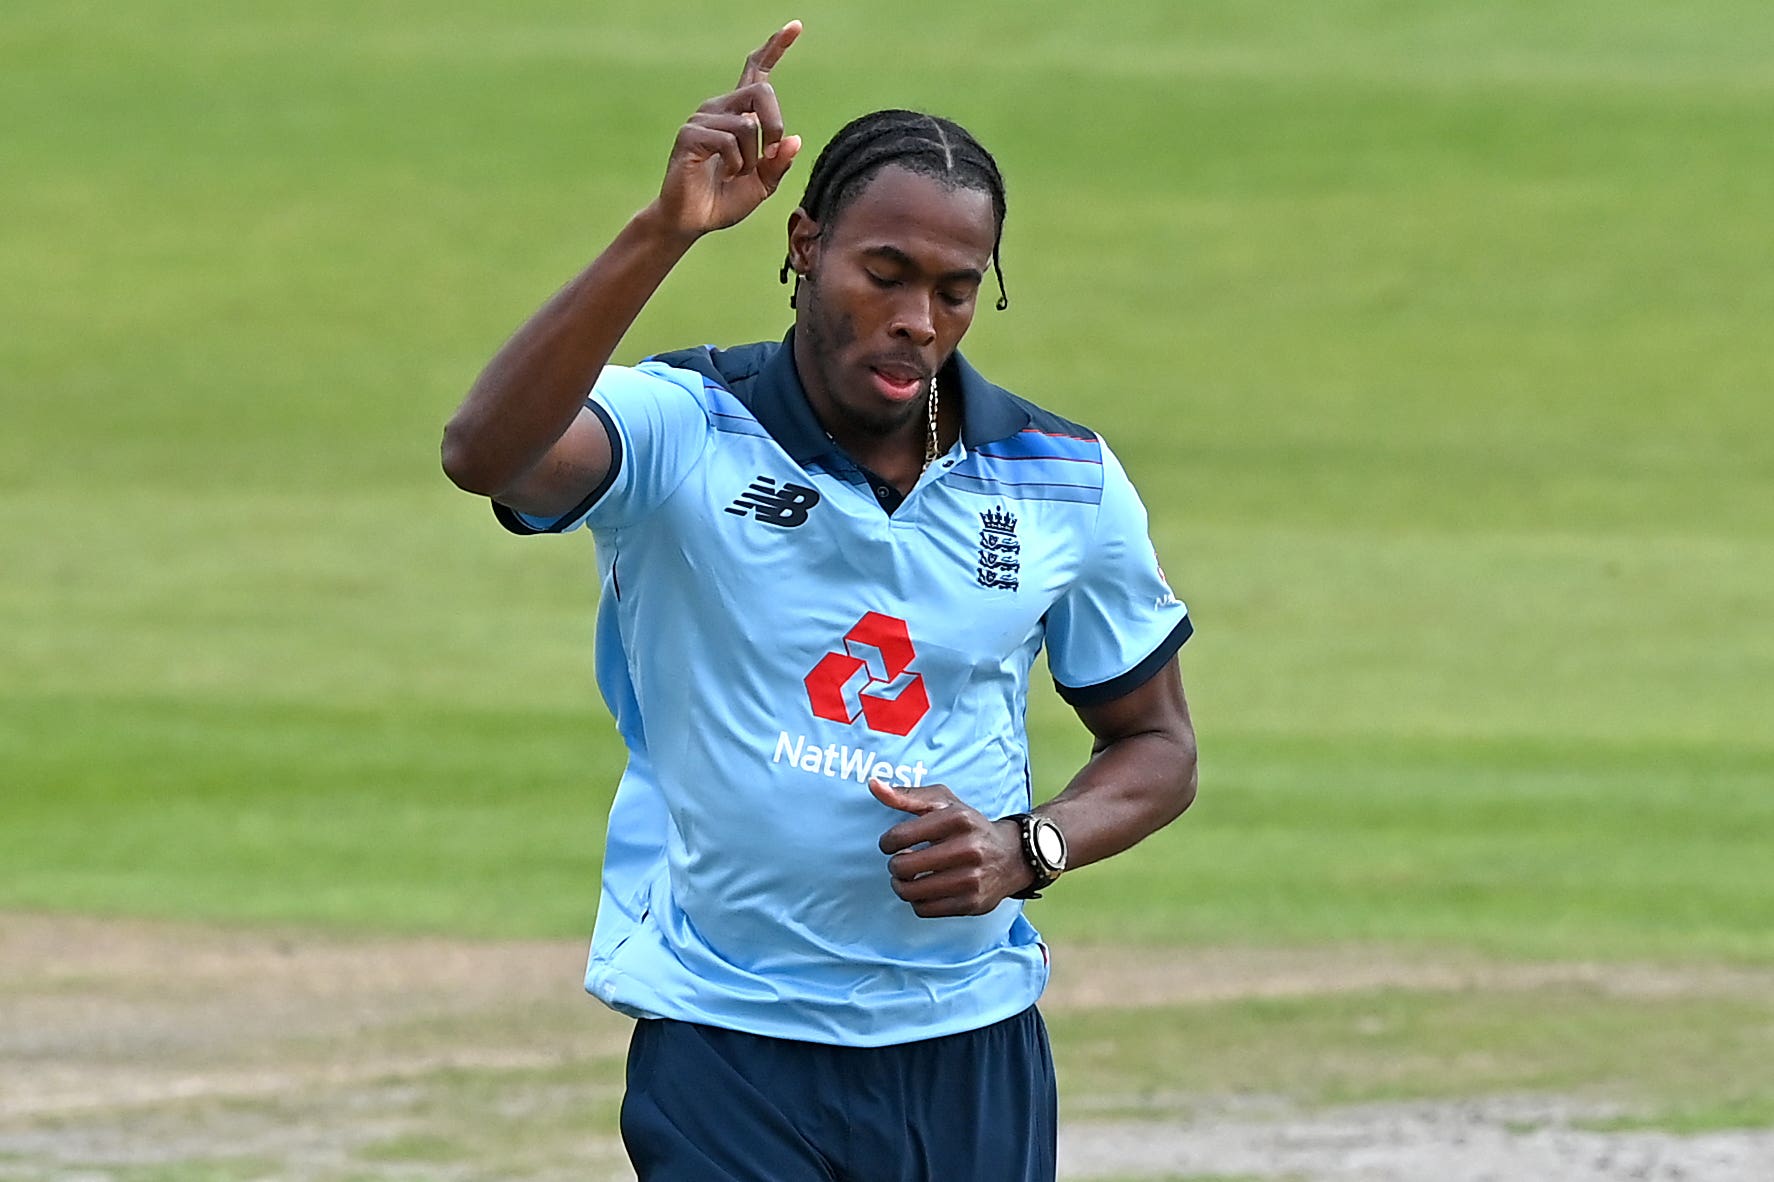 Archer was key to England’s 2019 World Cup triumph